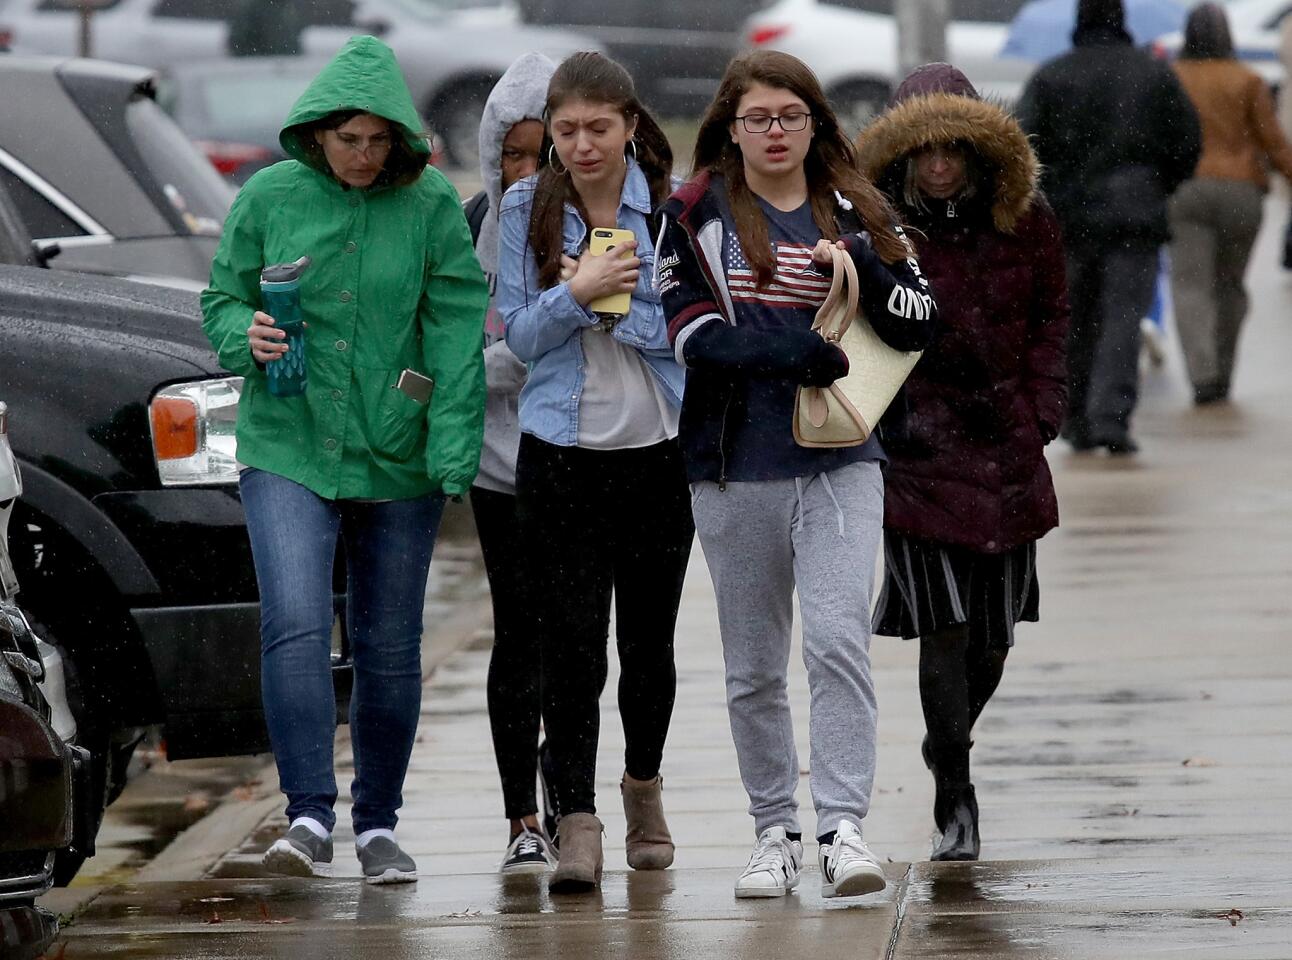 Students from Great Mills High School walk to meet their parents at Leonardtown High School following a school shooting at Great Mills High School on March 20, 2018 in Leonardtown, Md.